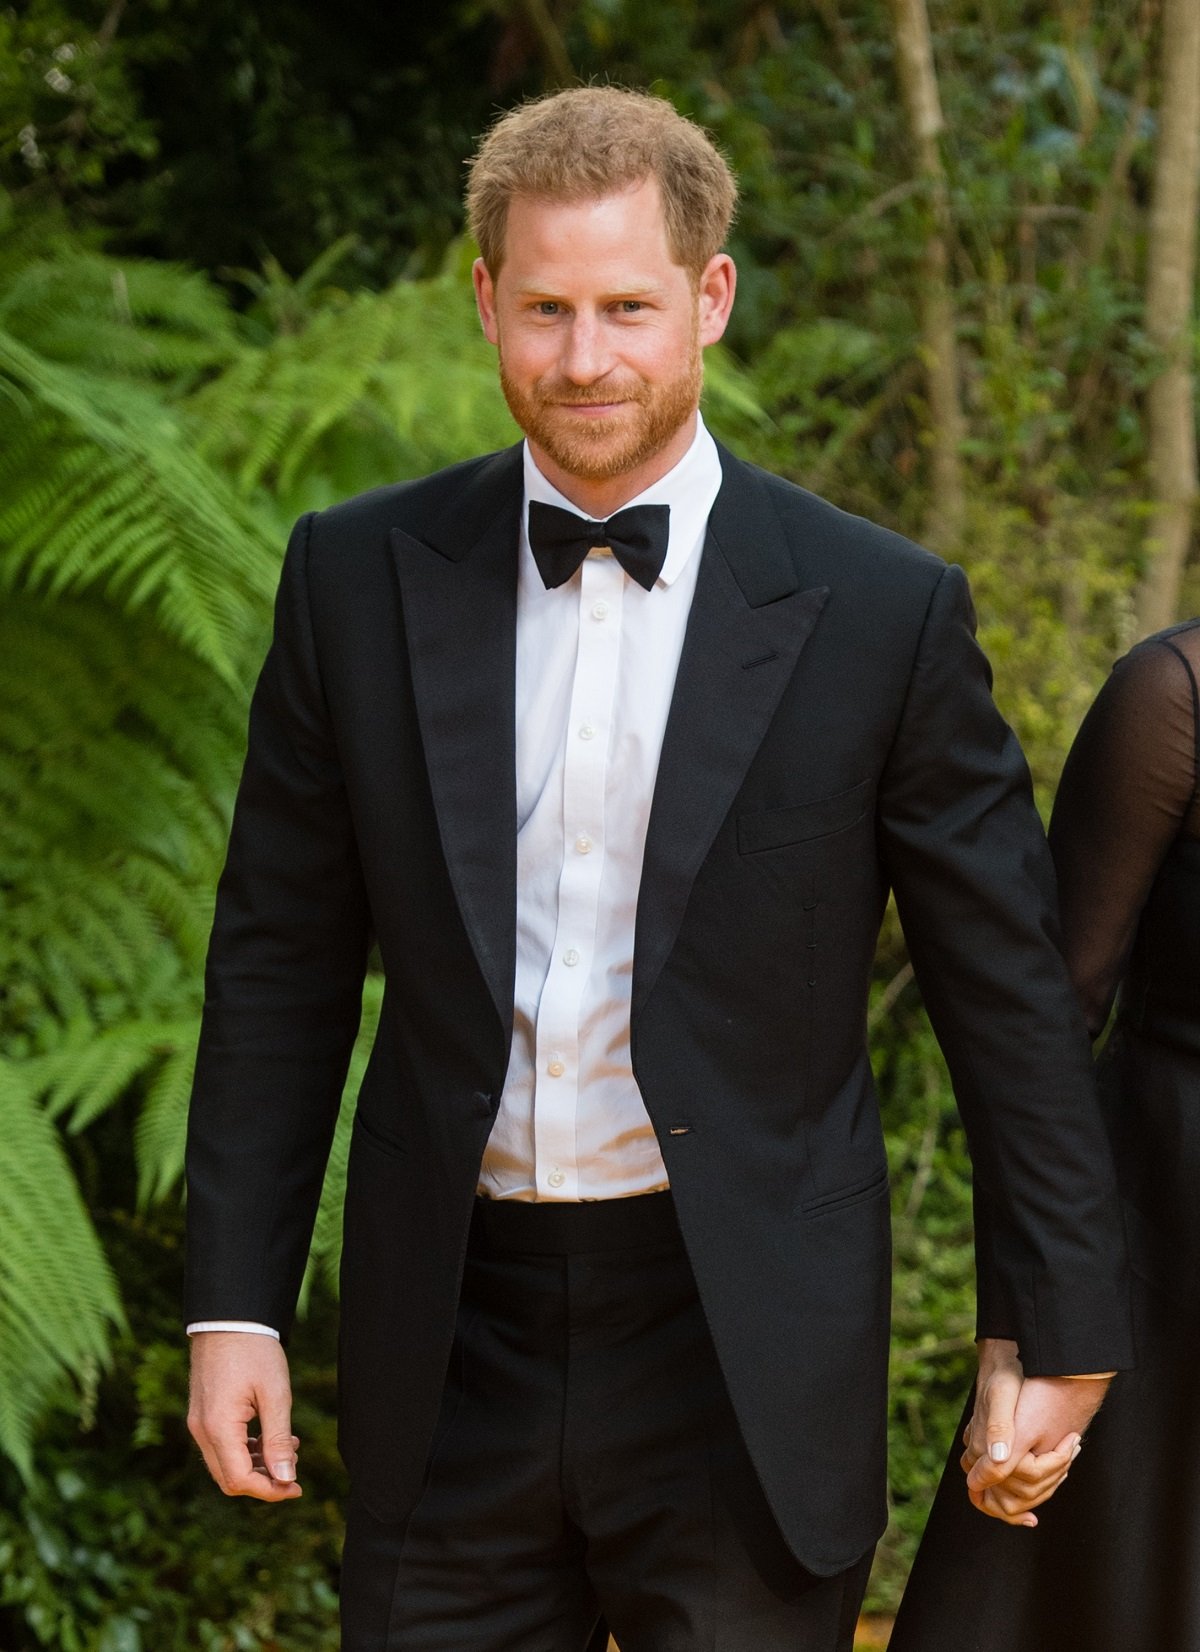 Prince Harry, Duke of Sussex, in a suit, holding hands with Meghan Markle (not fully pictured) at 'The Lion King' European Premiere at Leicester Square in London in 2019